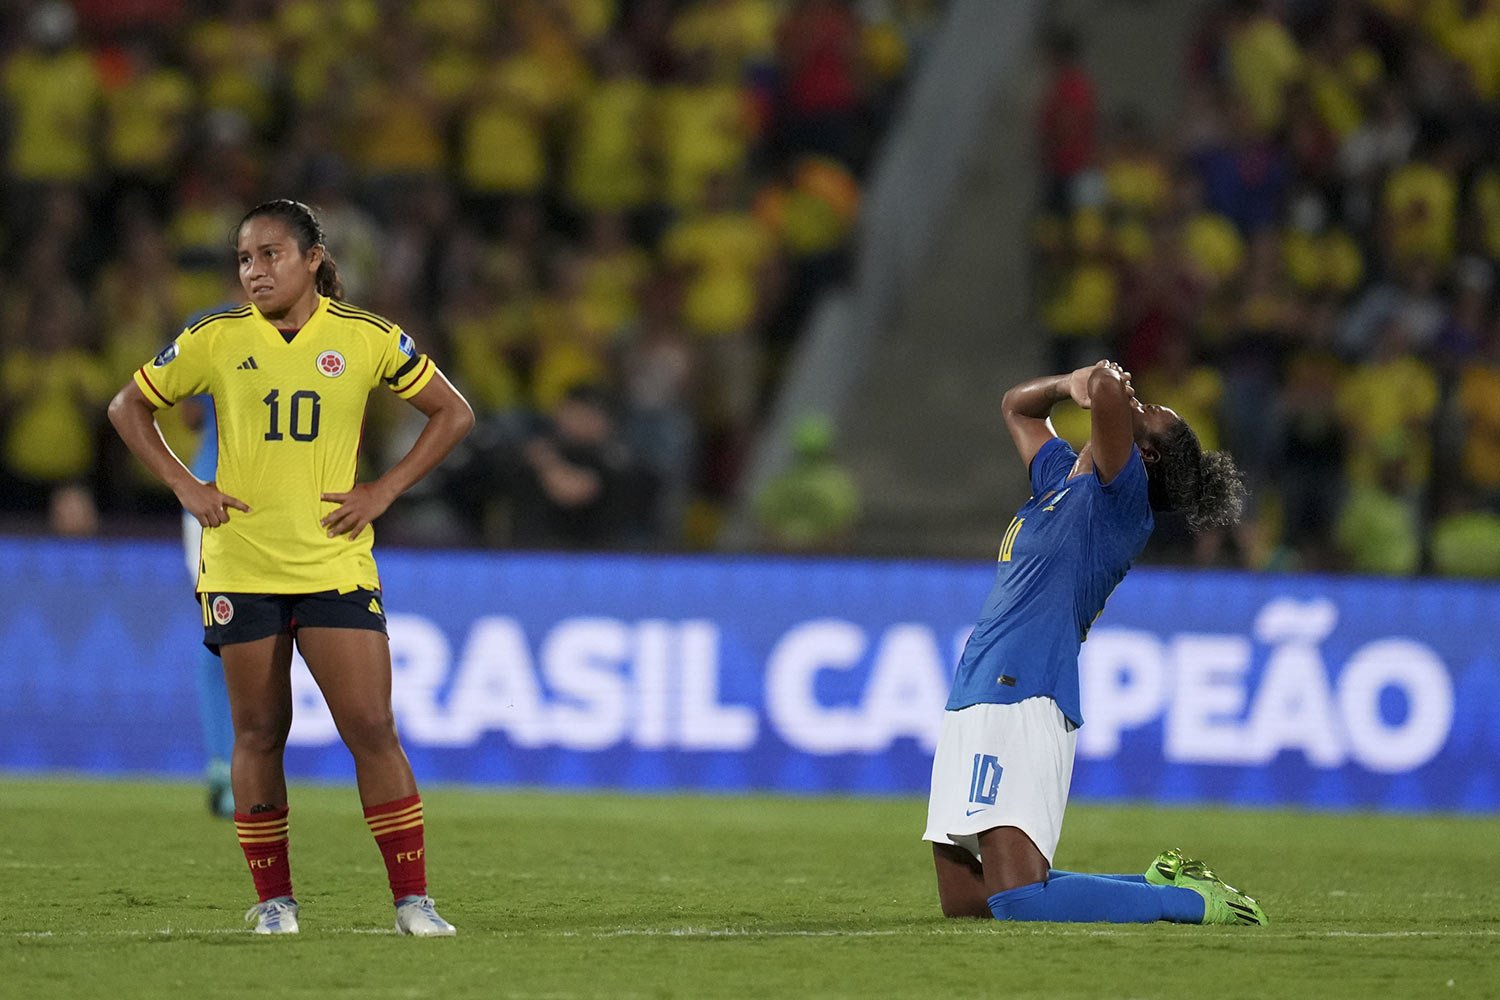  Colombia's Leicy Santos, left, and Brazil's Duda react at the end of the Women's Copa America final soccer match in Bucaramanga, Colombia , Saturday, July 30, 2022. Brazil won 1-0. (AP Photo/Dolores Ochoa) 